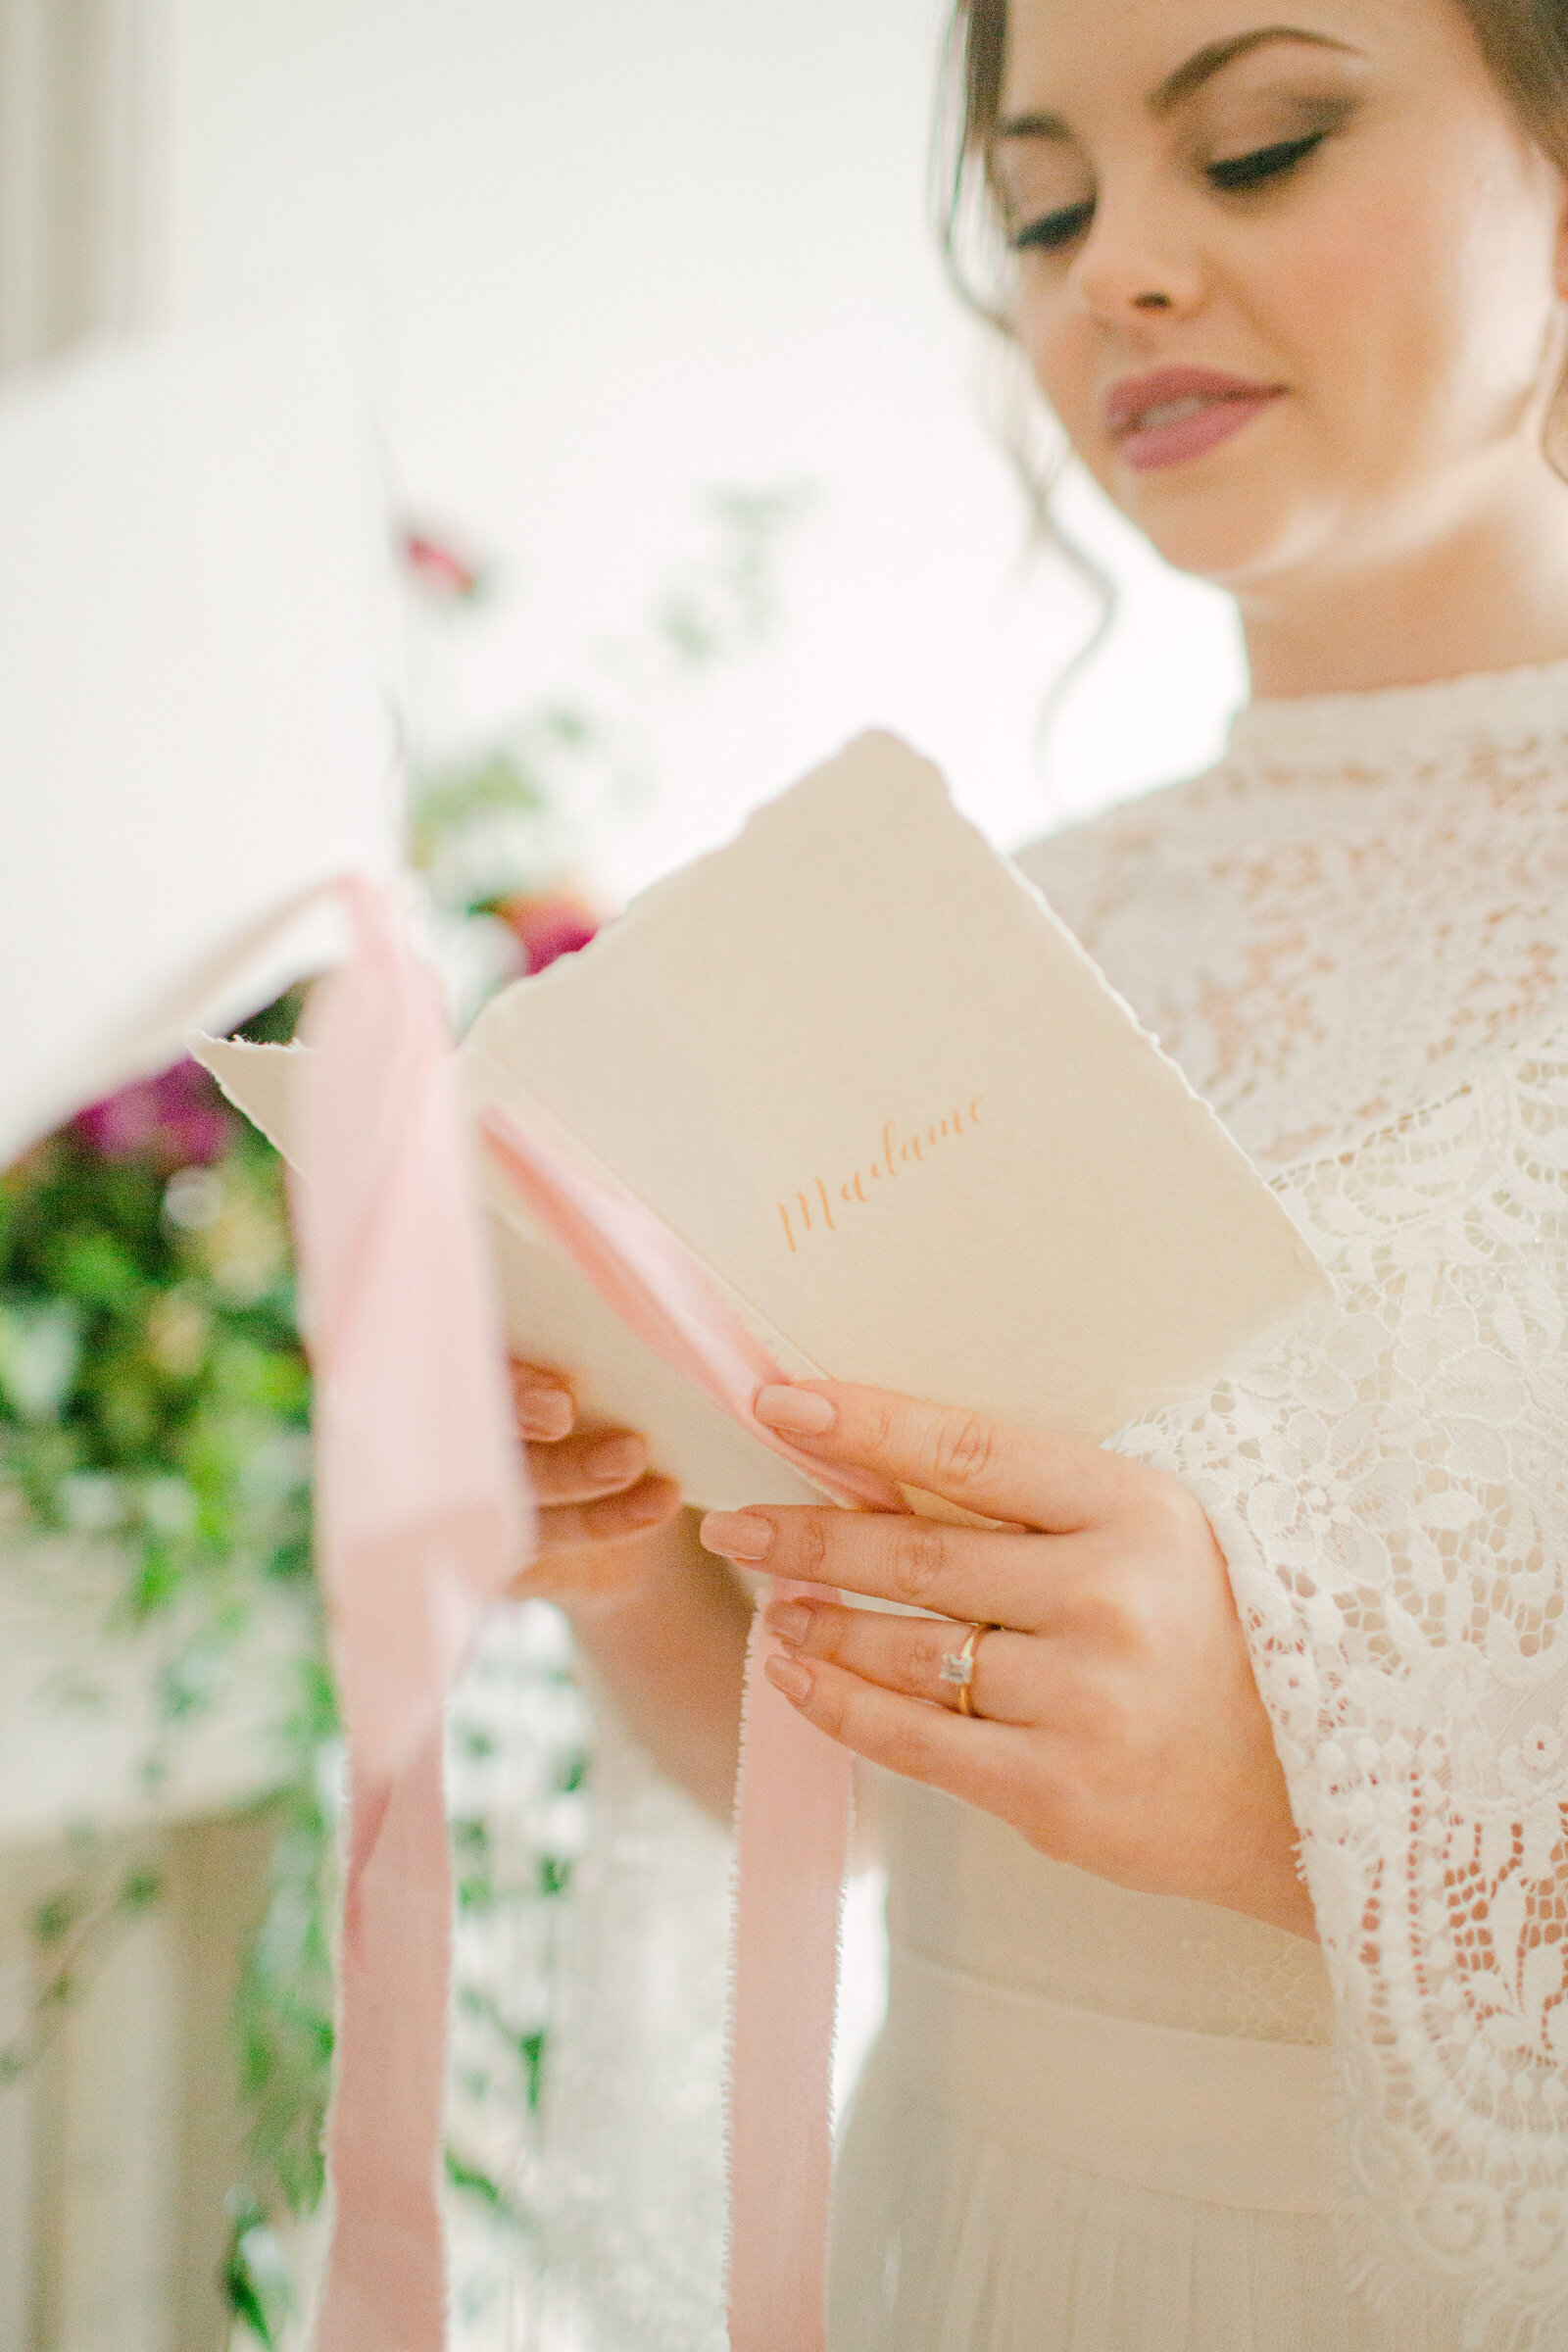 bride facing groom holding vow book and exchanging her vows